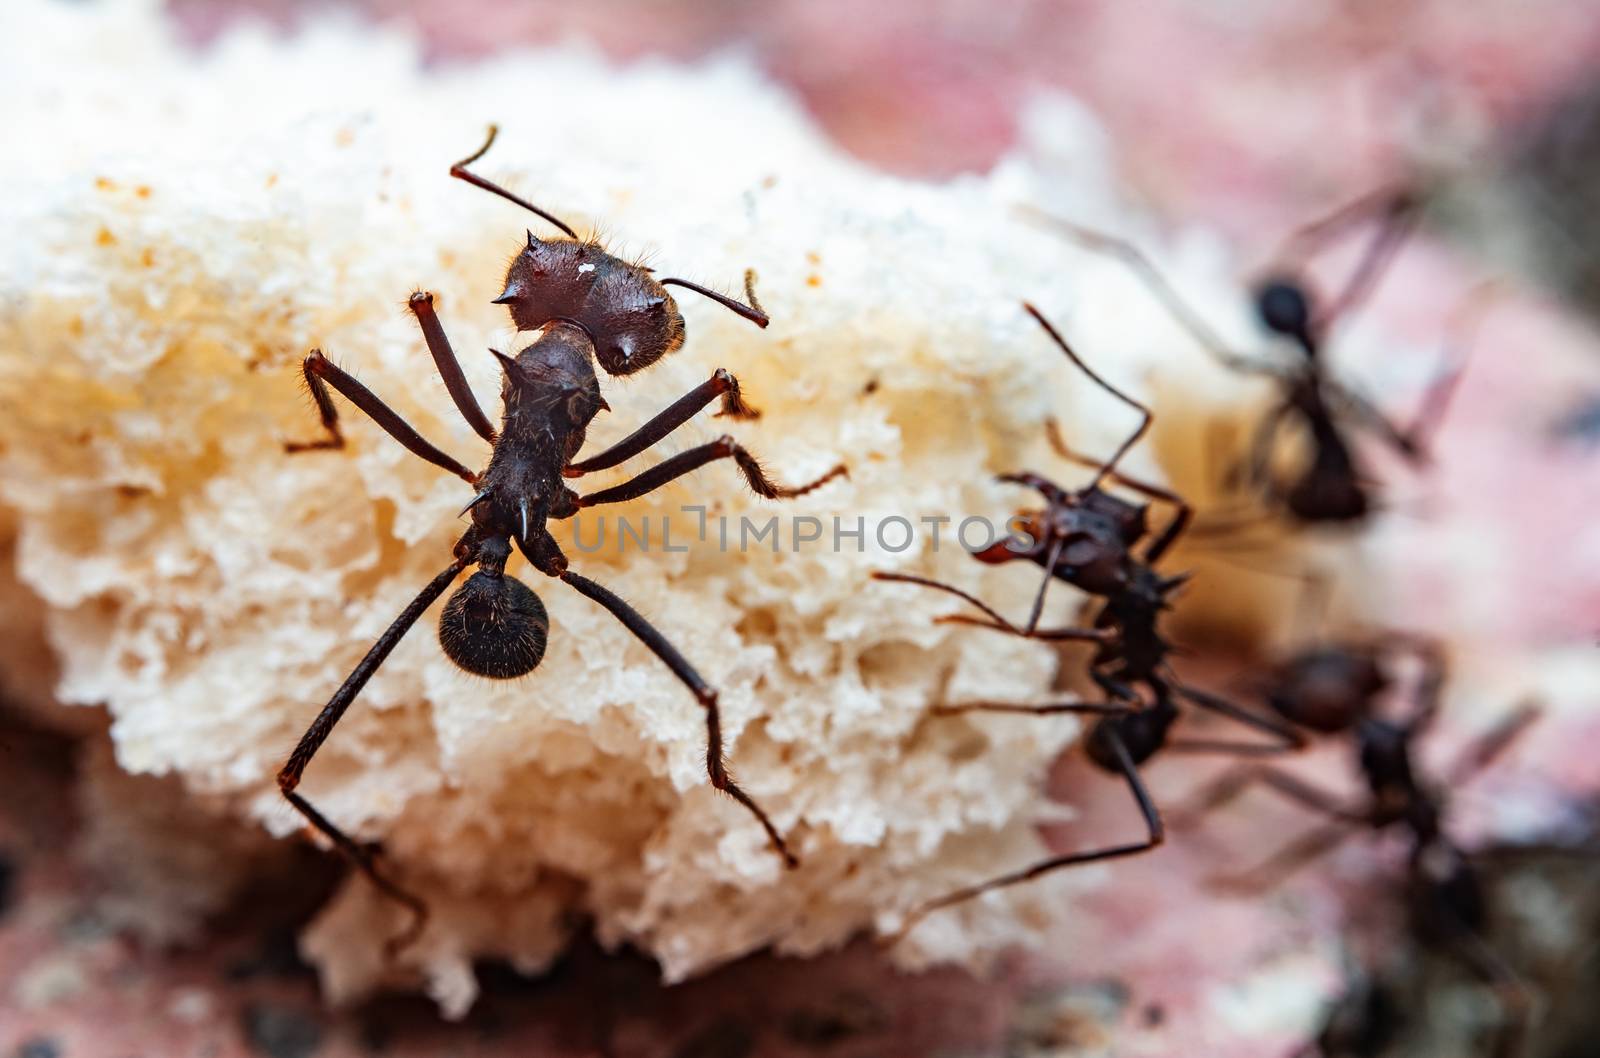 Macro photograph of leaf cutter ants on a piece of bread